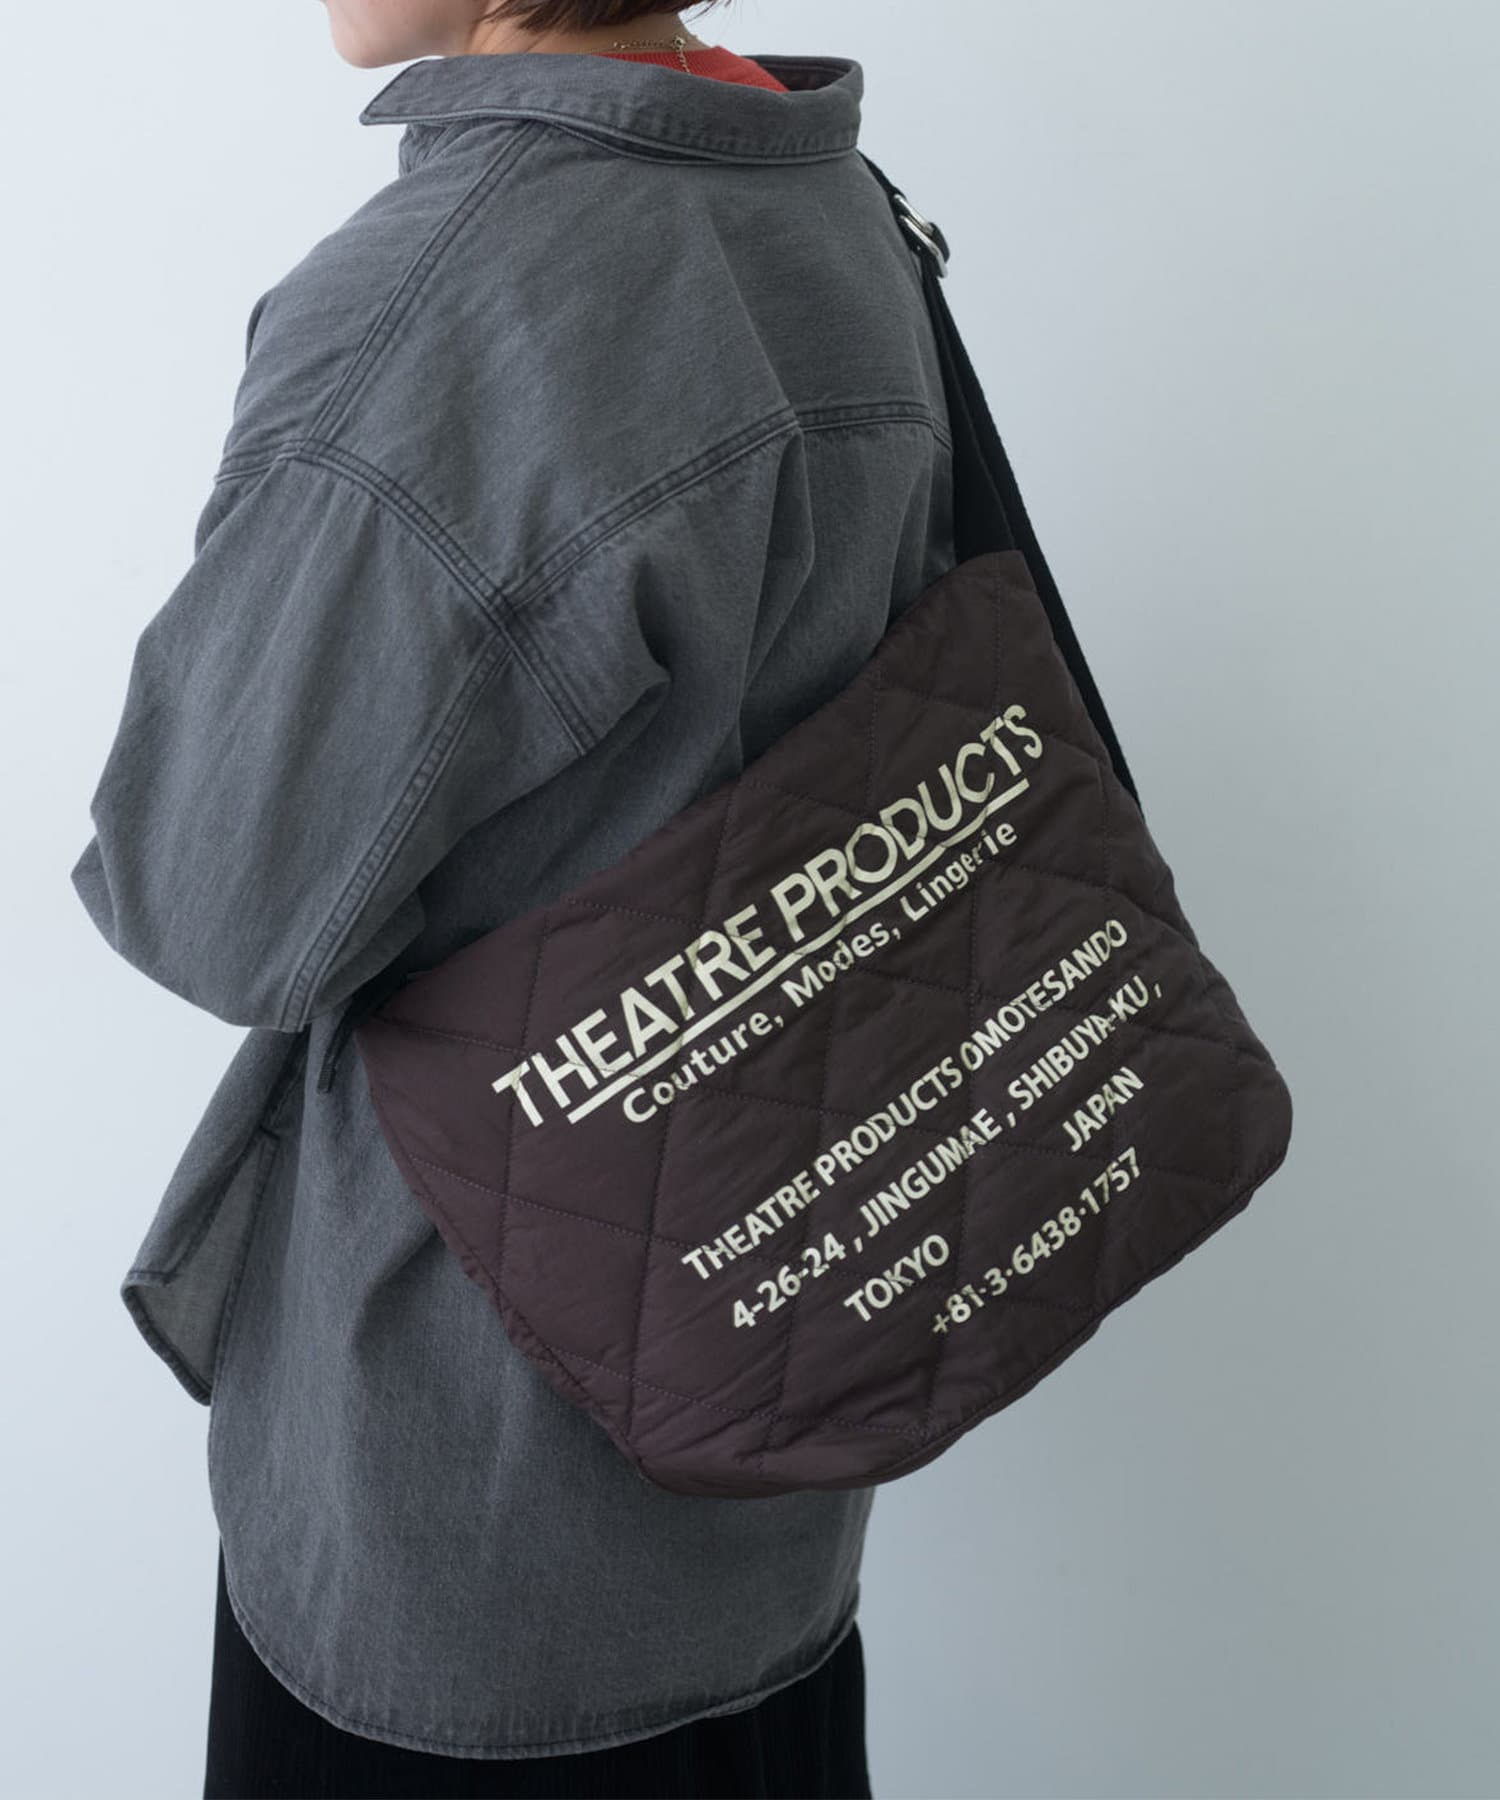 PUAL CE CIN(ピュアルセシン) 【THEATRE PRODUCTS】PUFFER MESSENGER BAG